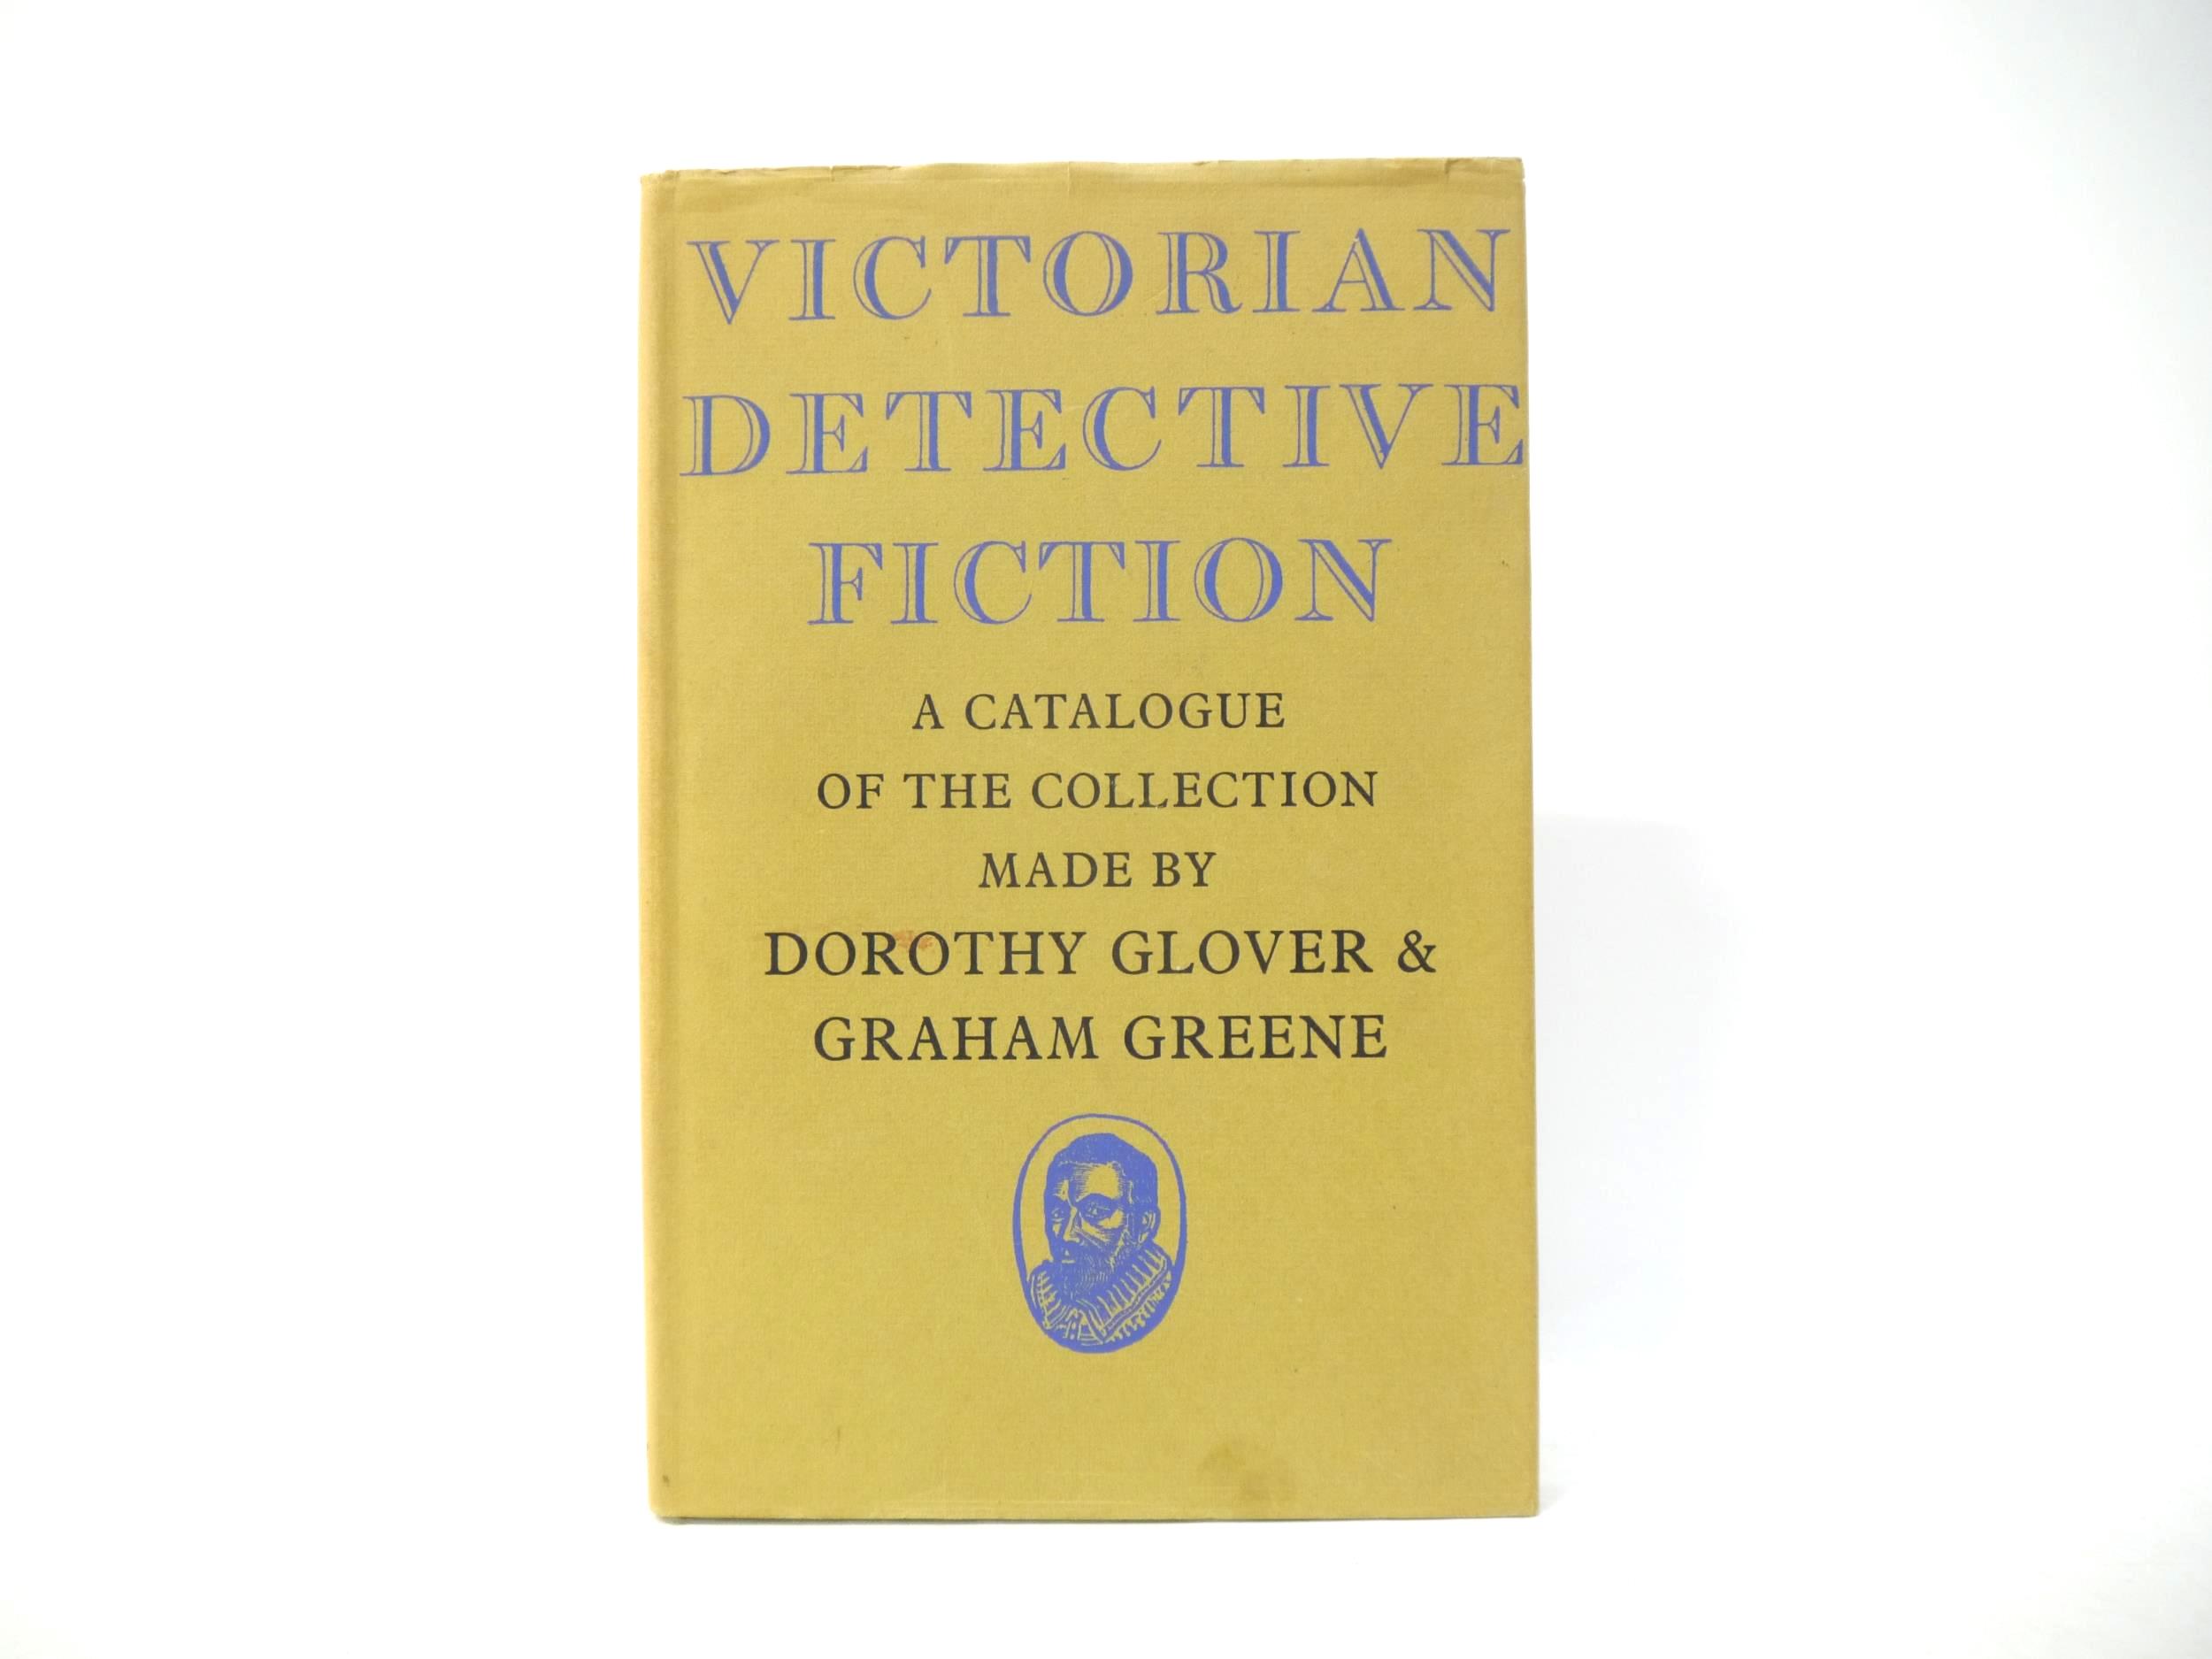 Graham Greene & Dorothy Glover: 'Victorian Detective Fiction: A Catalogue of the Collection Made